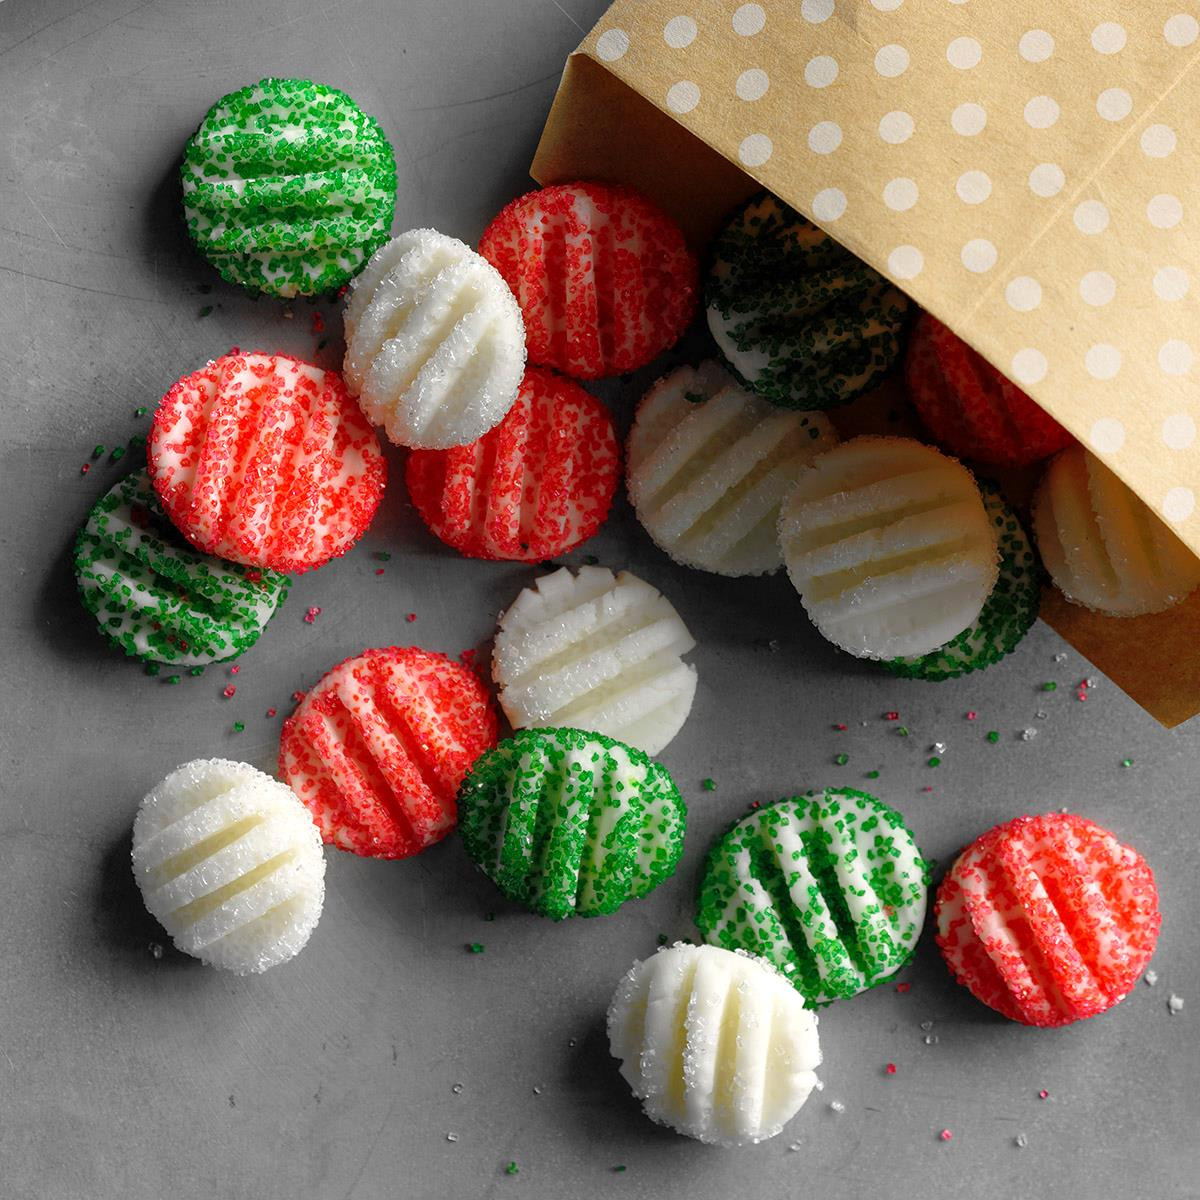 Best Christmas Candy Recipes
 Top 10 Homemade Christmas Candy Recipes